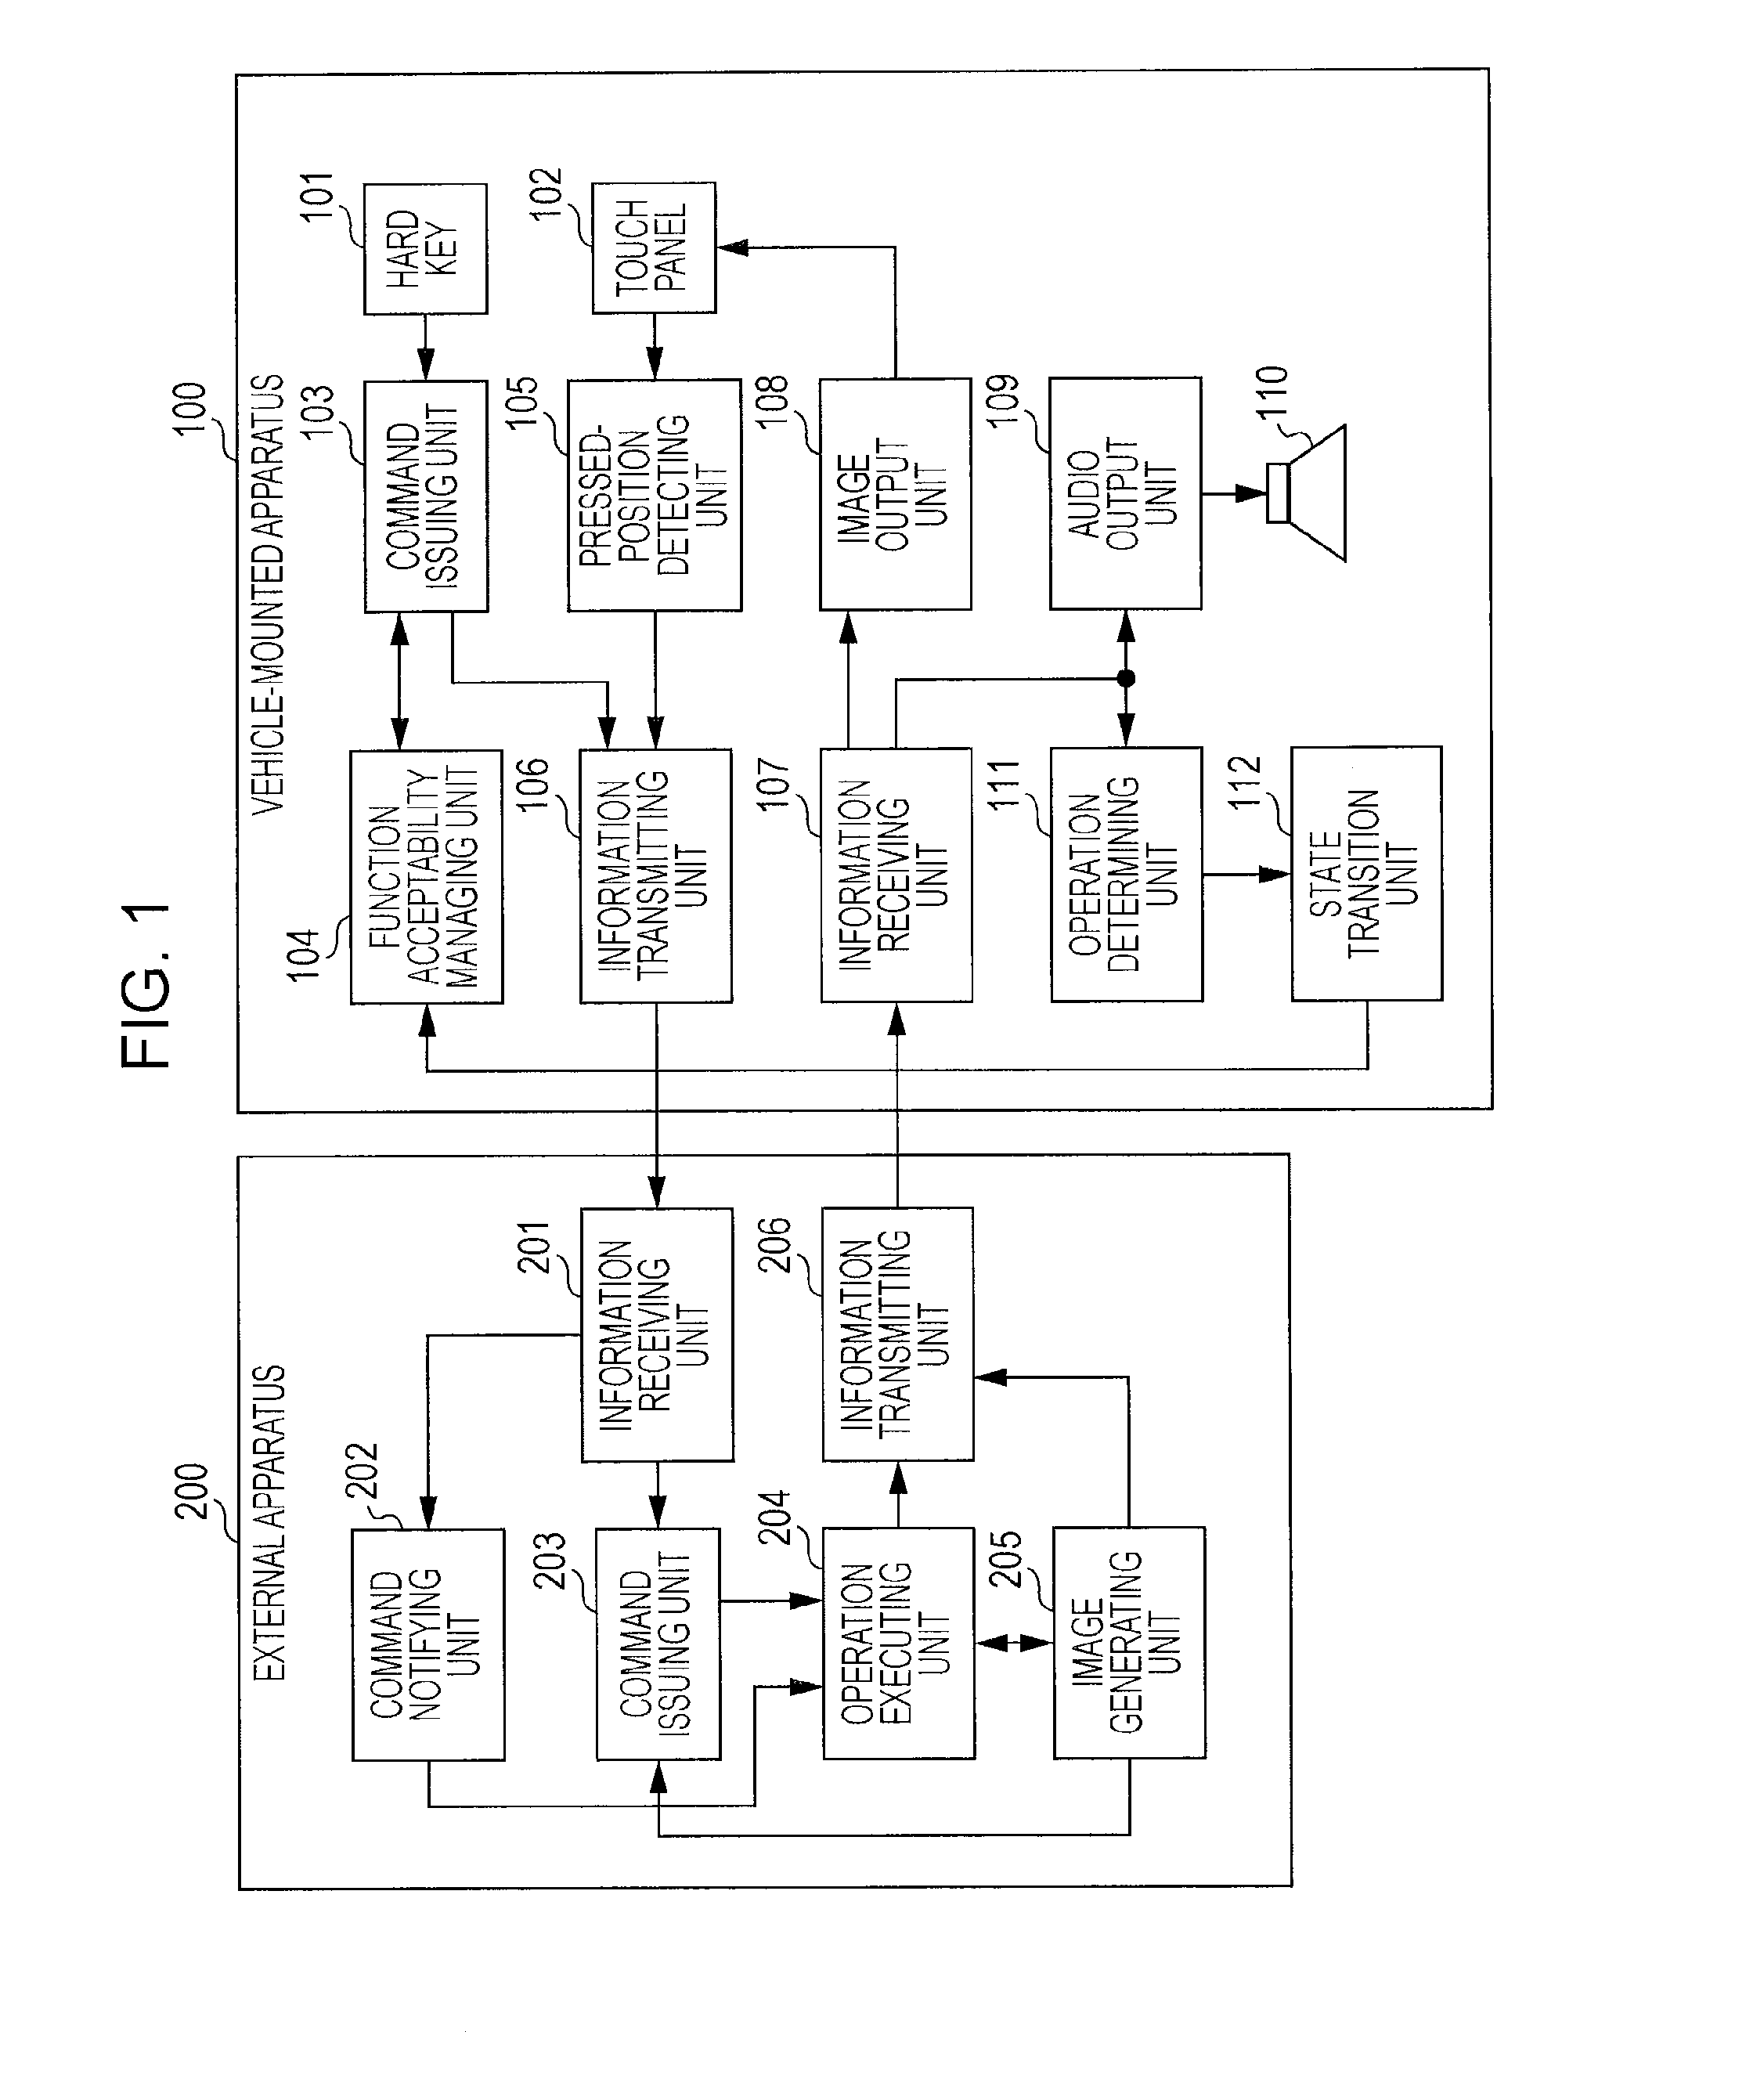 Operation Control Apparatus and Operation Control Method for External Apparatus Connected to Vehicle-Mounted Apparatus